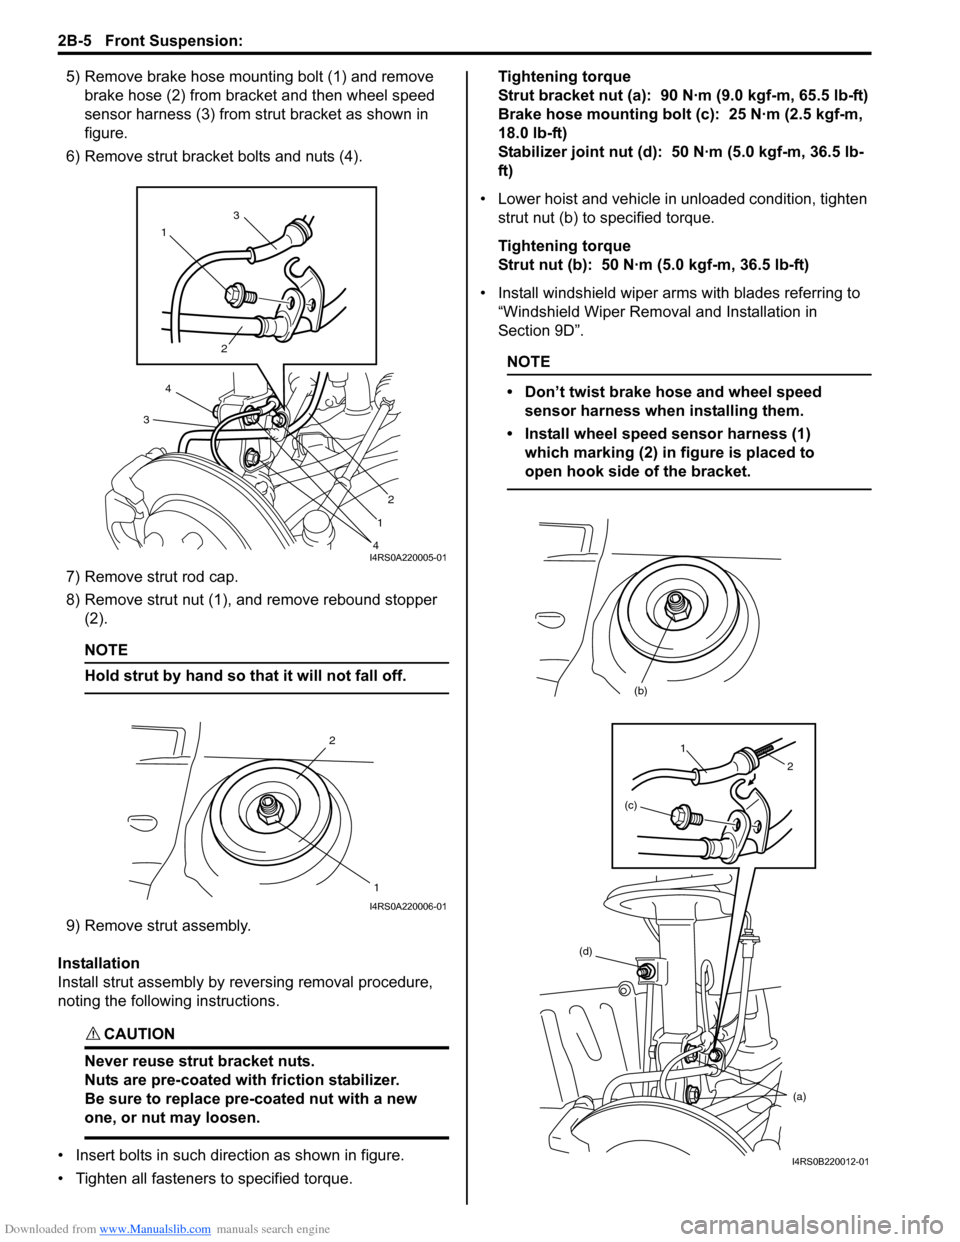 SUZUKI SWIFT 2008 2.G Service Owners Manual Downloaded from www.Manualslib.com manuals search engine 2B-5 Front Suspension: 
5) Remove brake hose mounting bolt (1) and remove brake hose (2) from bracket and then wheel speed 
sensor harness (3) 